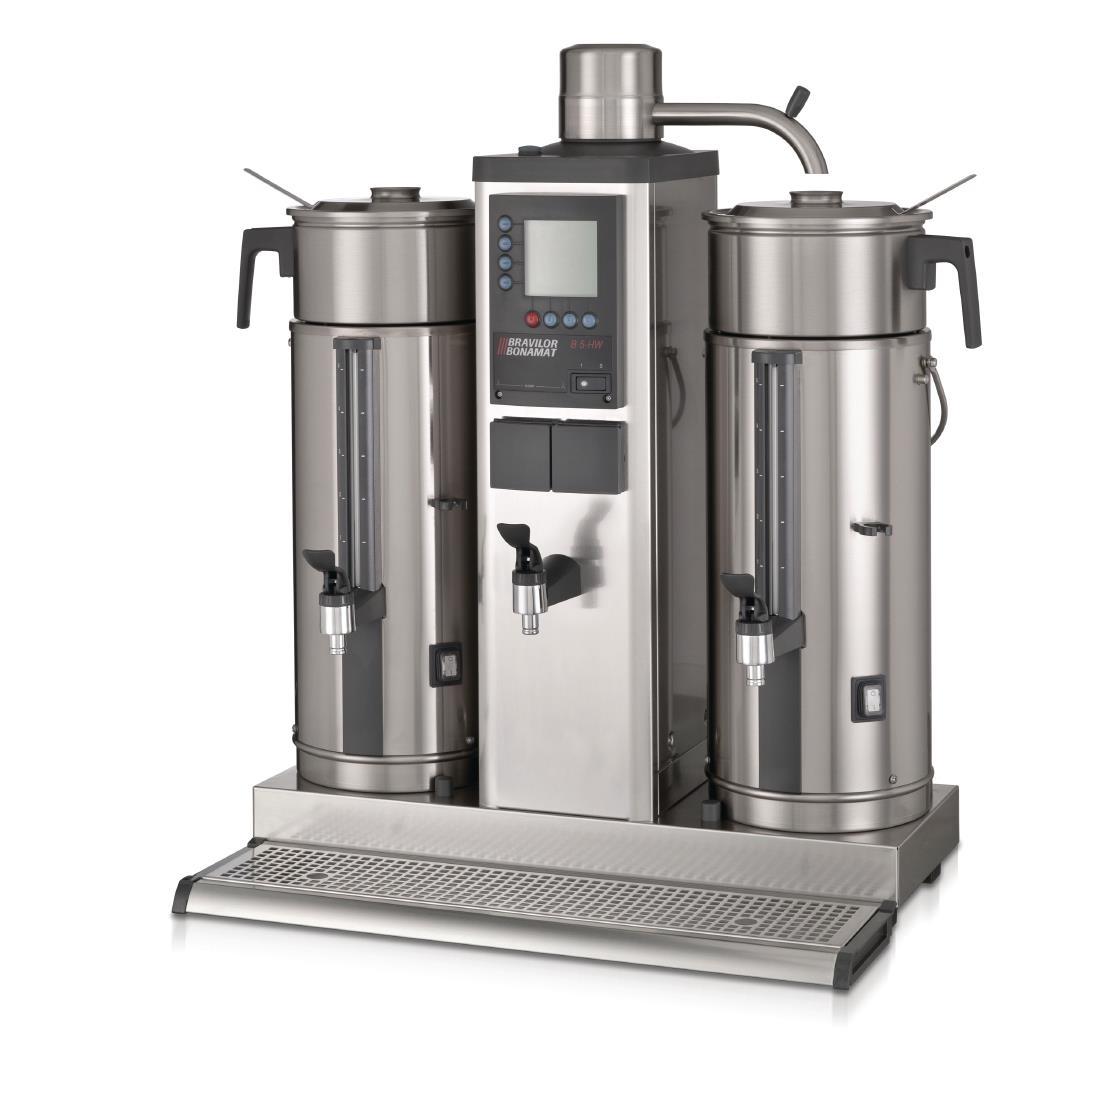 Bravilor B20 HW Bulk Coffee Brewer with 2x20Ltr Coffee Urns and Hot Water Tap 3 Phase - DC693-3P  - 1